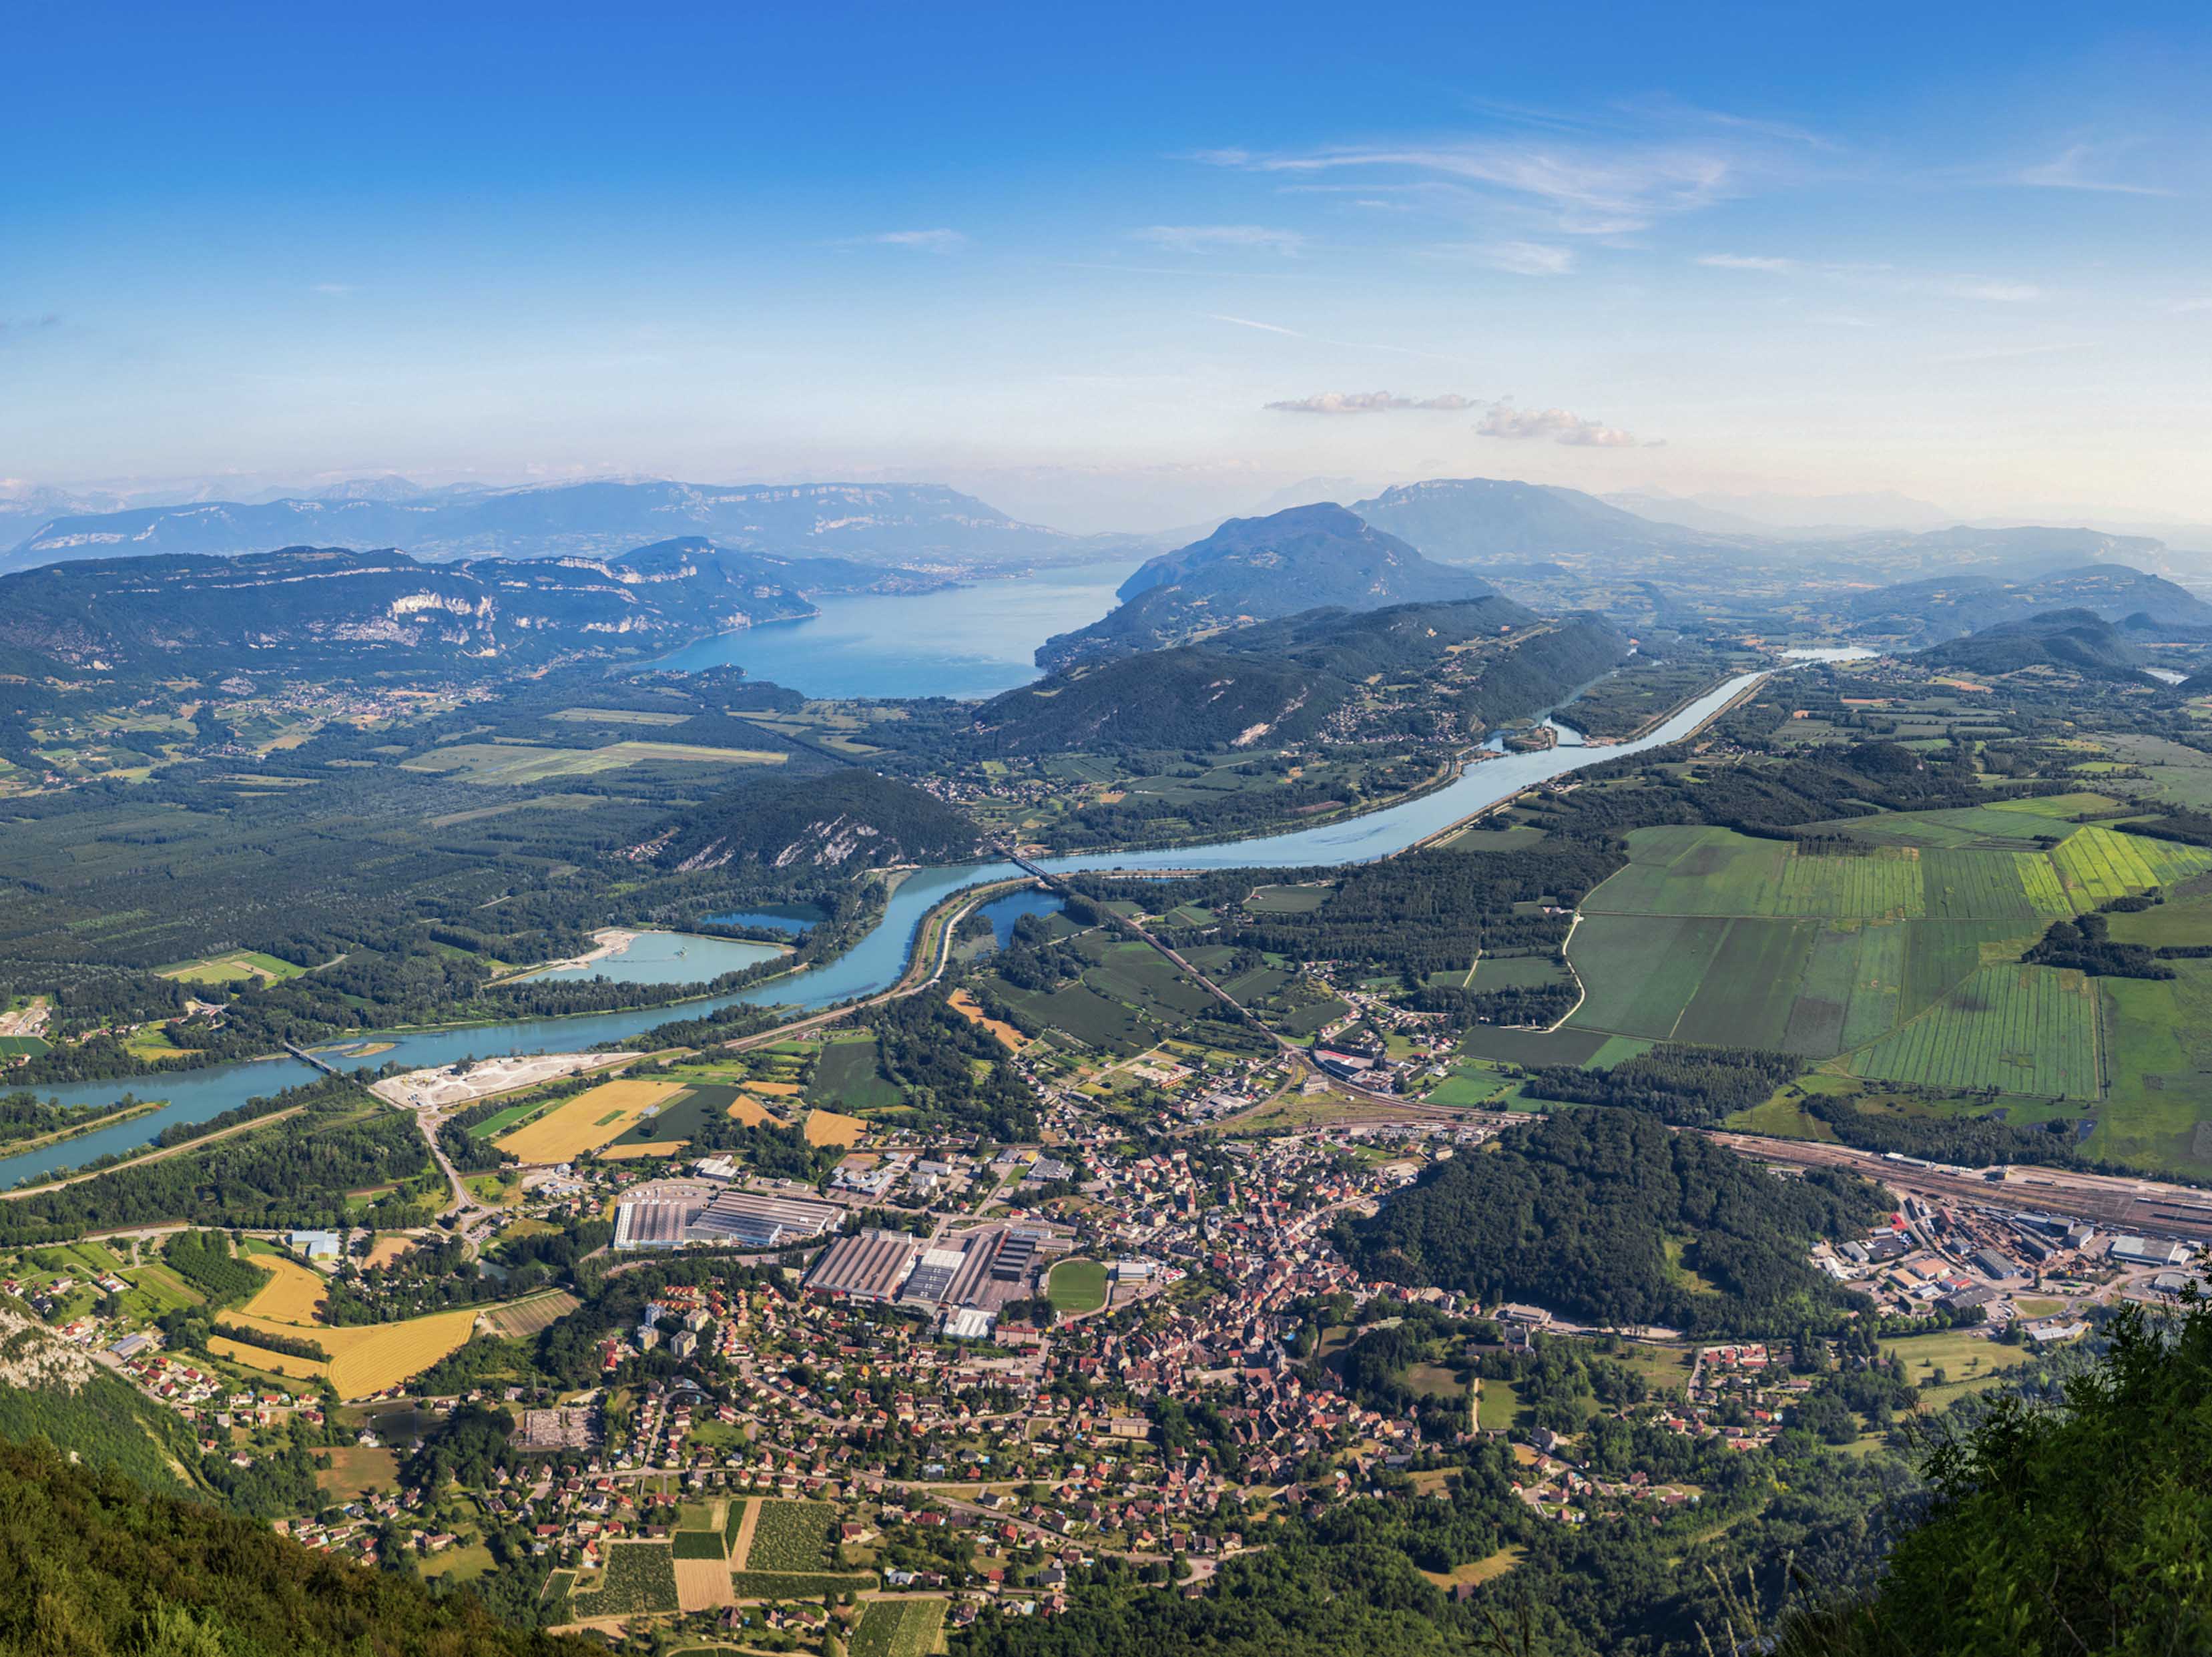 Each territory is unique. Shown here is the village of Culoz on the banks of the Rhône. © Getty Images